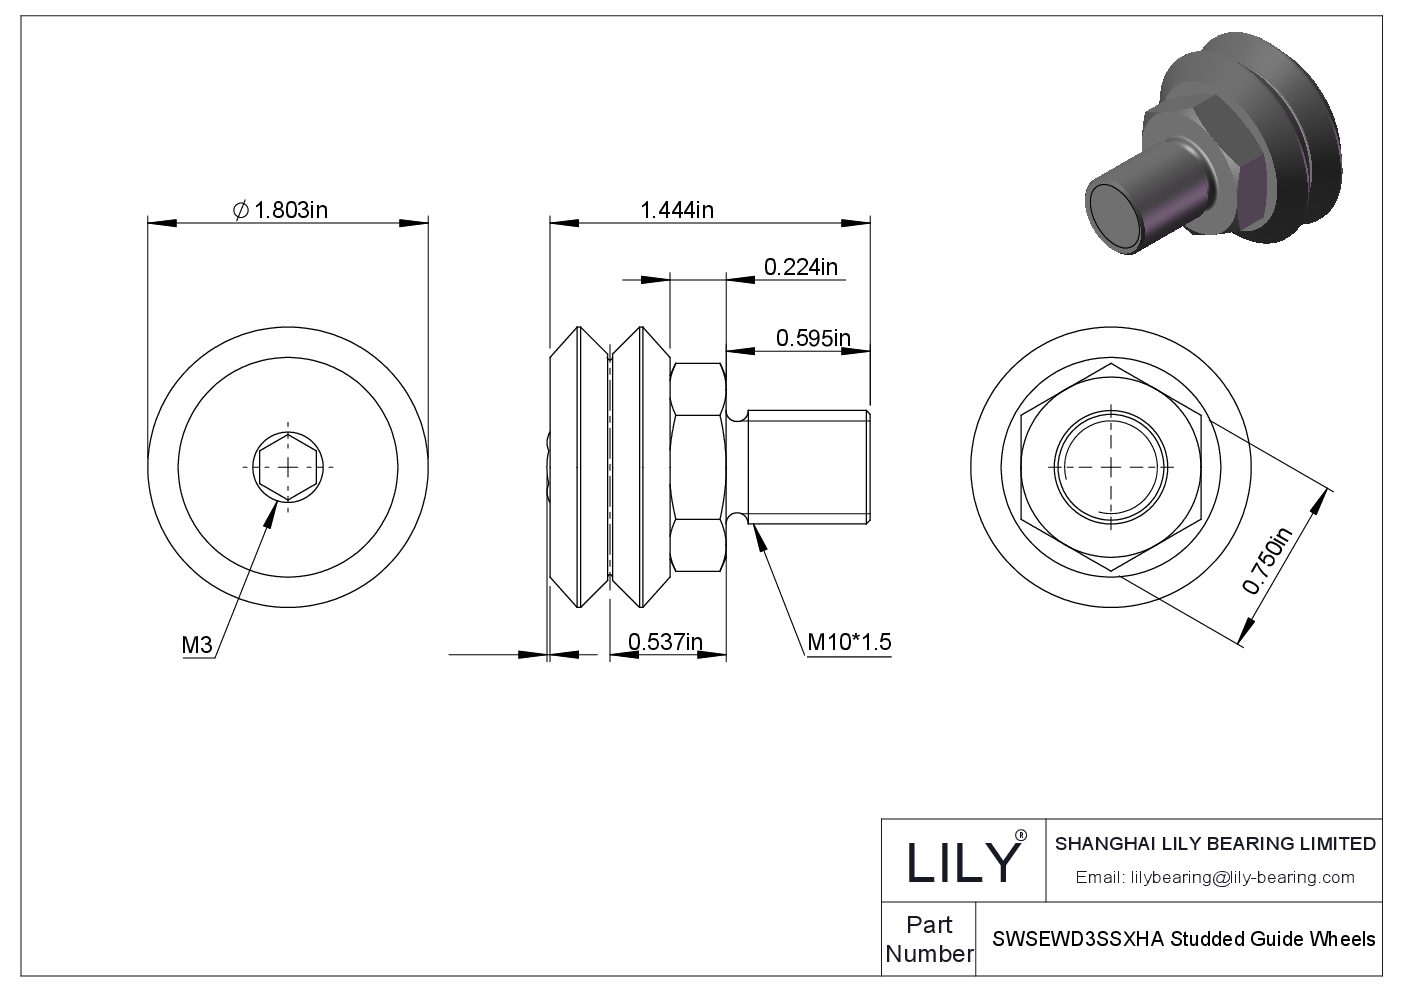 SWSEWD3SSXHA Studded Guide Wheels cad drawing